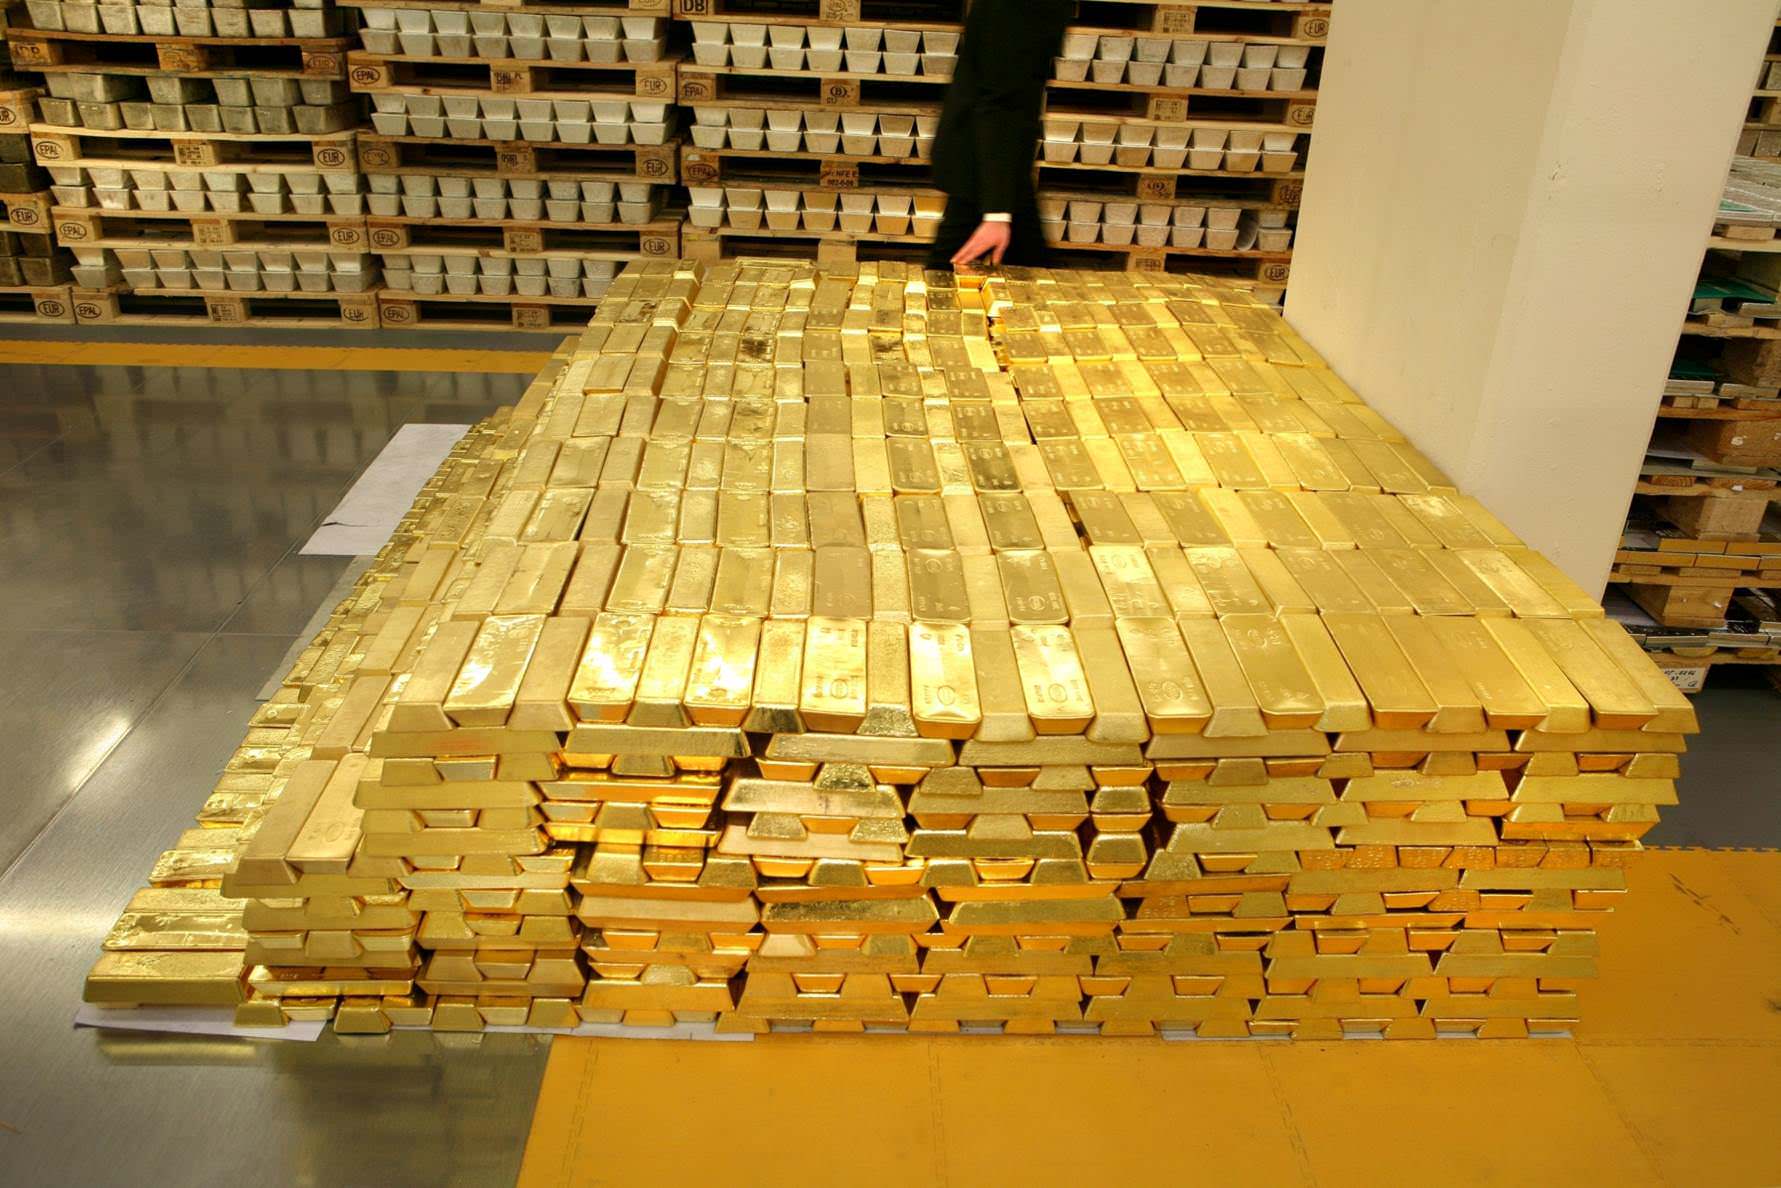 This is what ~$1.6 billion USD worth of gold looks like.